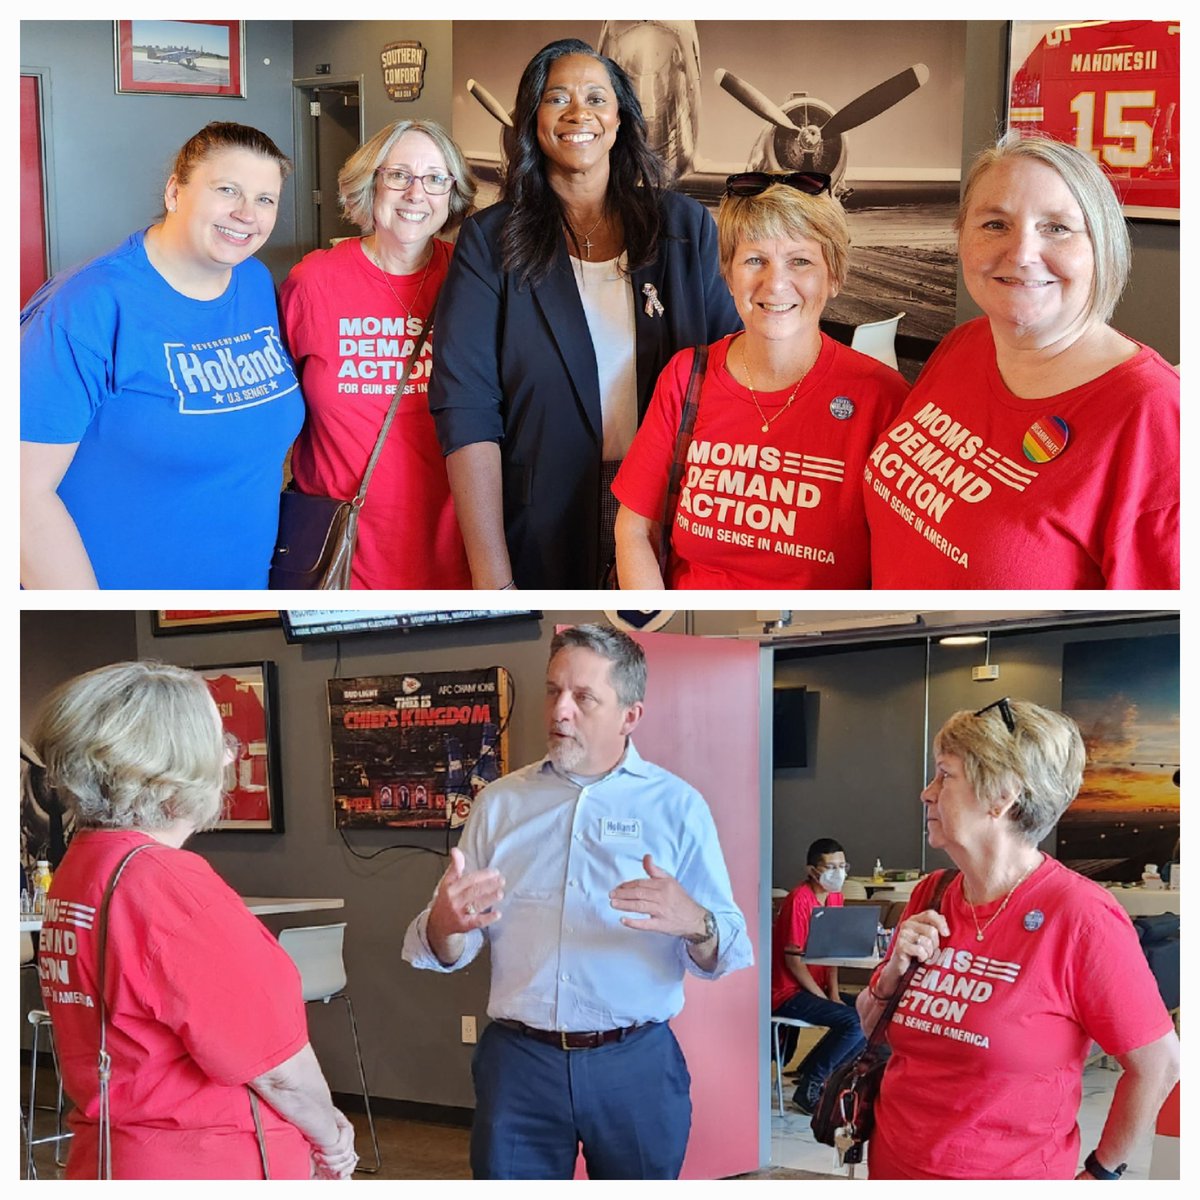 Happening now. Wyandotte Co @MomsDemand volunteers are at a rally for #GunSenseCandidates @Holland4Kansas &  Jenna Repass 4 Secretary of State on #weekendofaction #MomsAreEveryWhere #ksleg @and_elevate